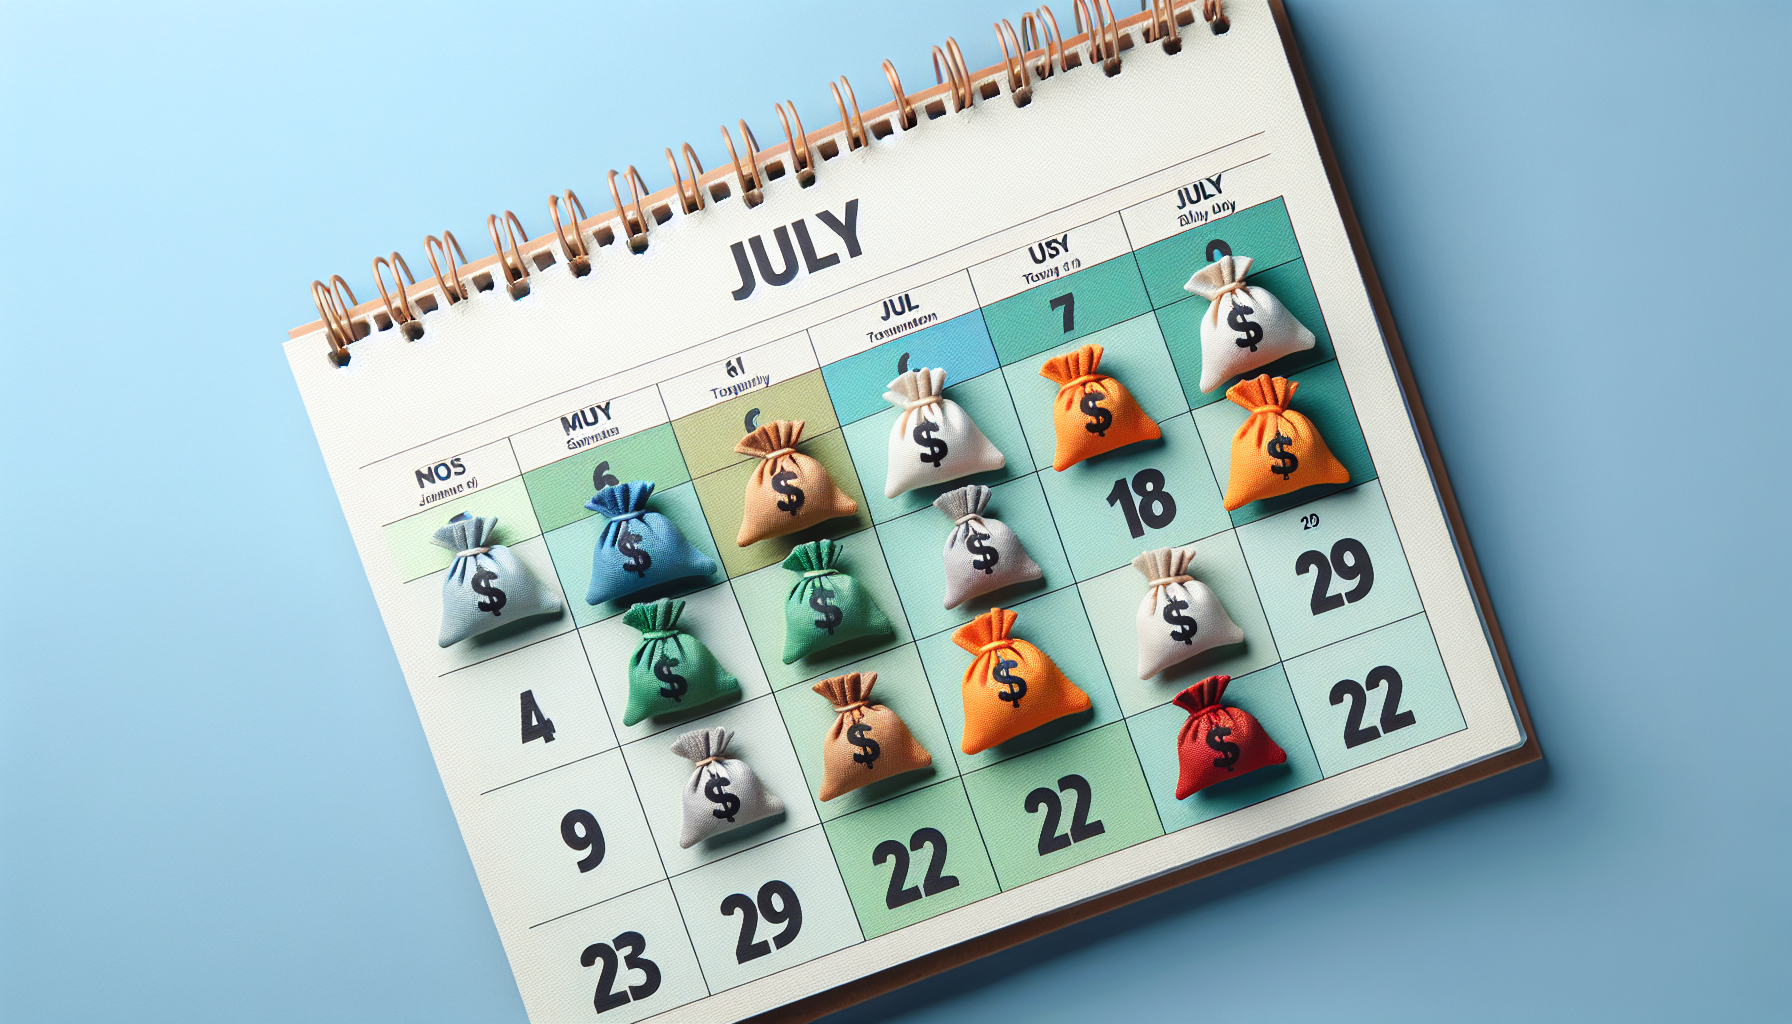 July Family Allowance Calendar Revealed! Check Out All the Details for This Month